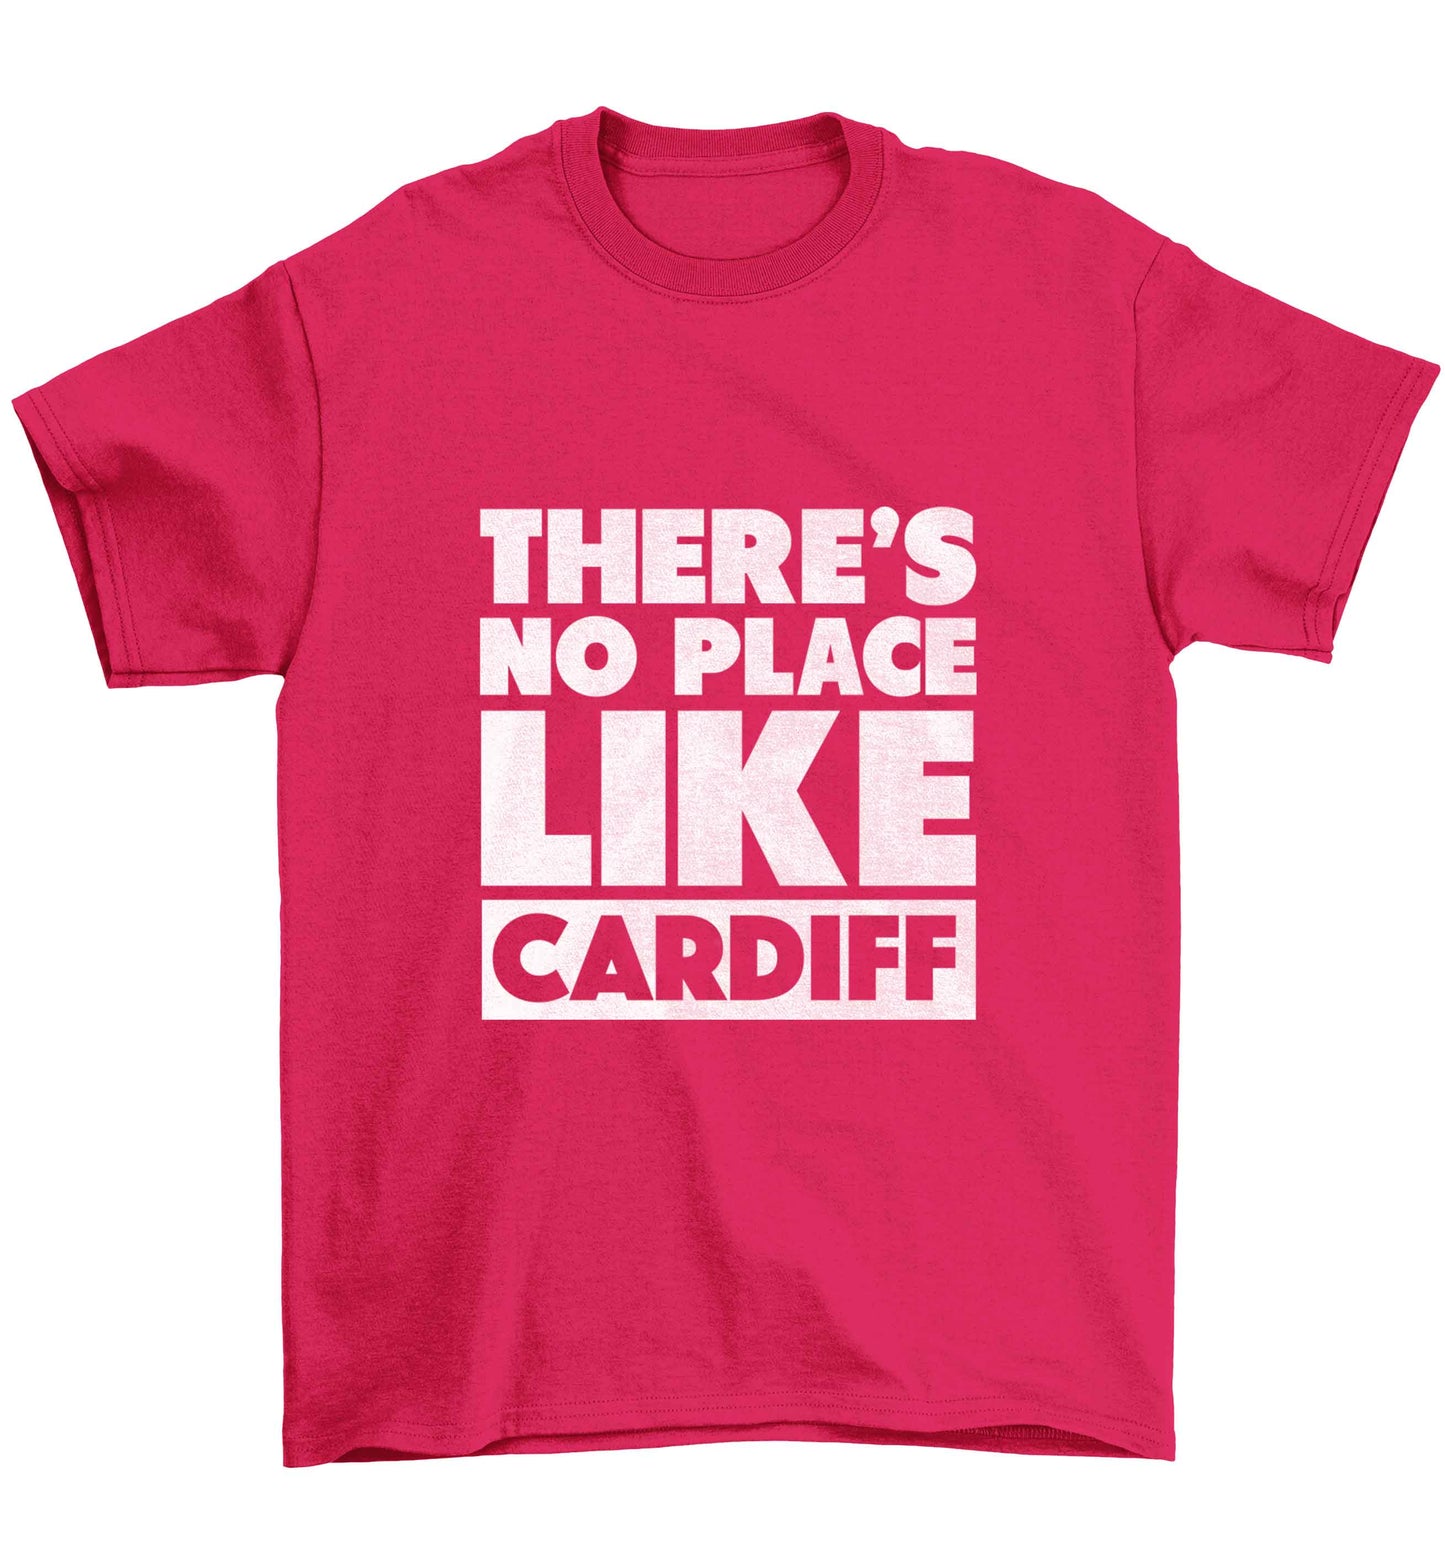 There's no place like Cardiff Children's pink Tshirt 12-13 Years